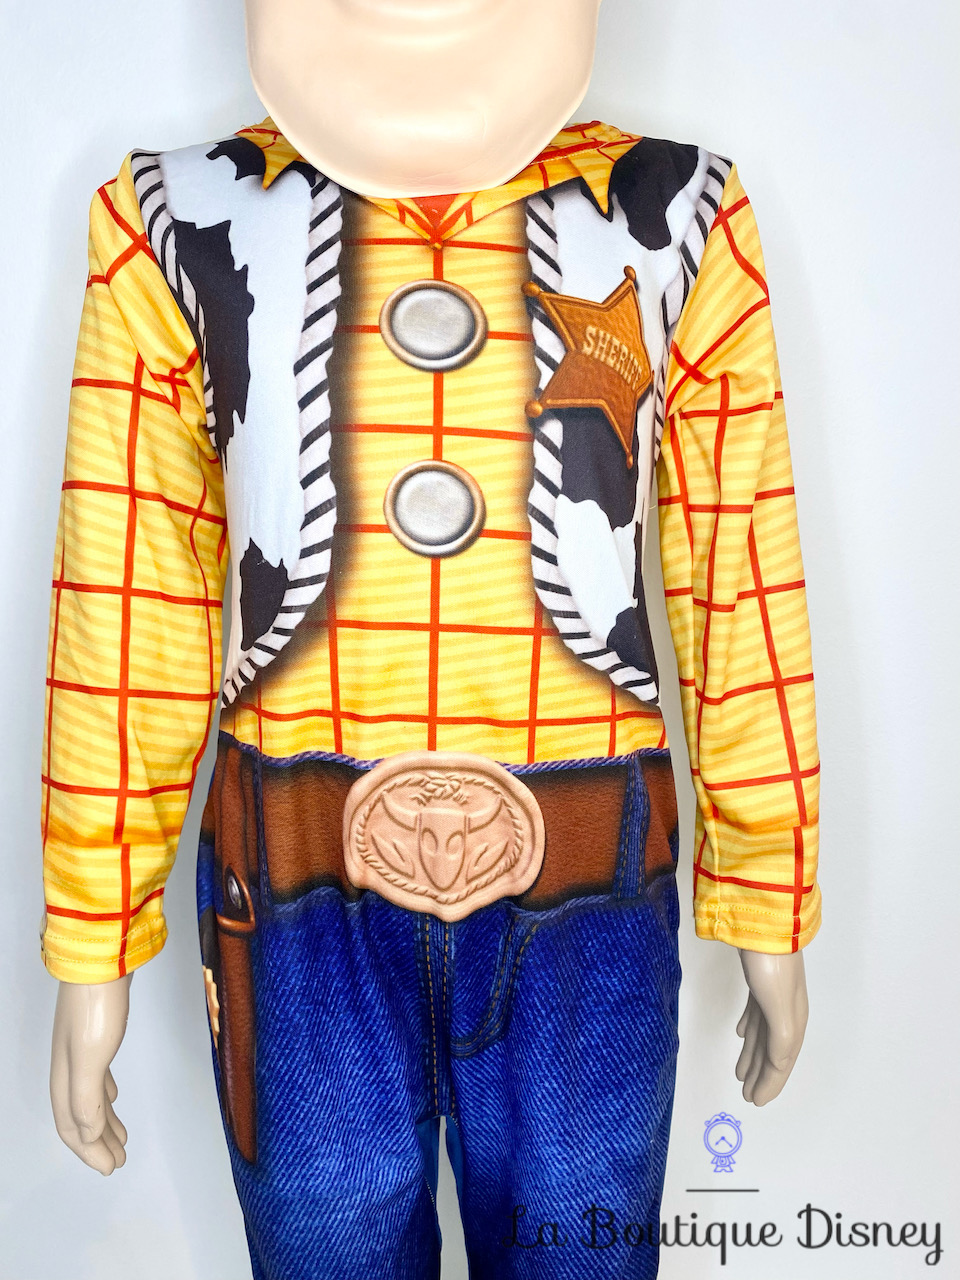 déguisement-woody-toy-story-disney-rubies-taille-3-4-ans-cow-boy-masque-17